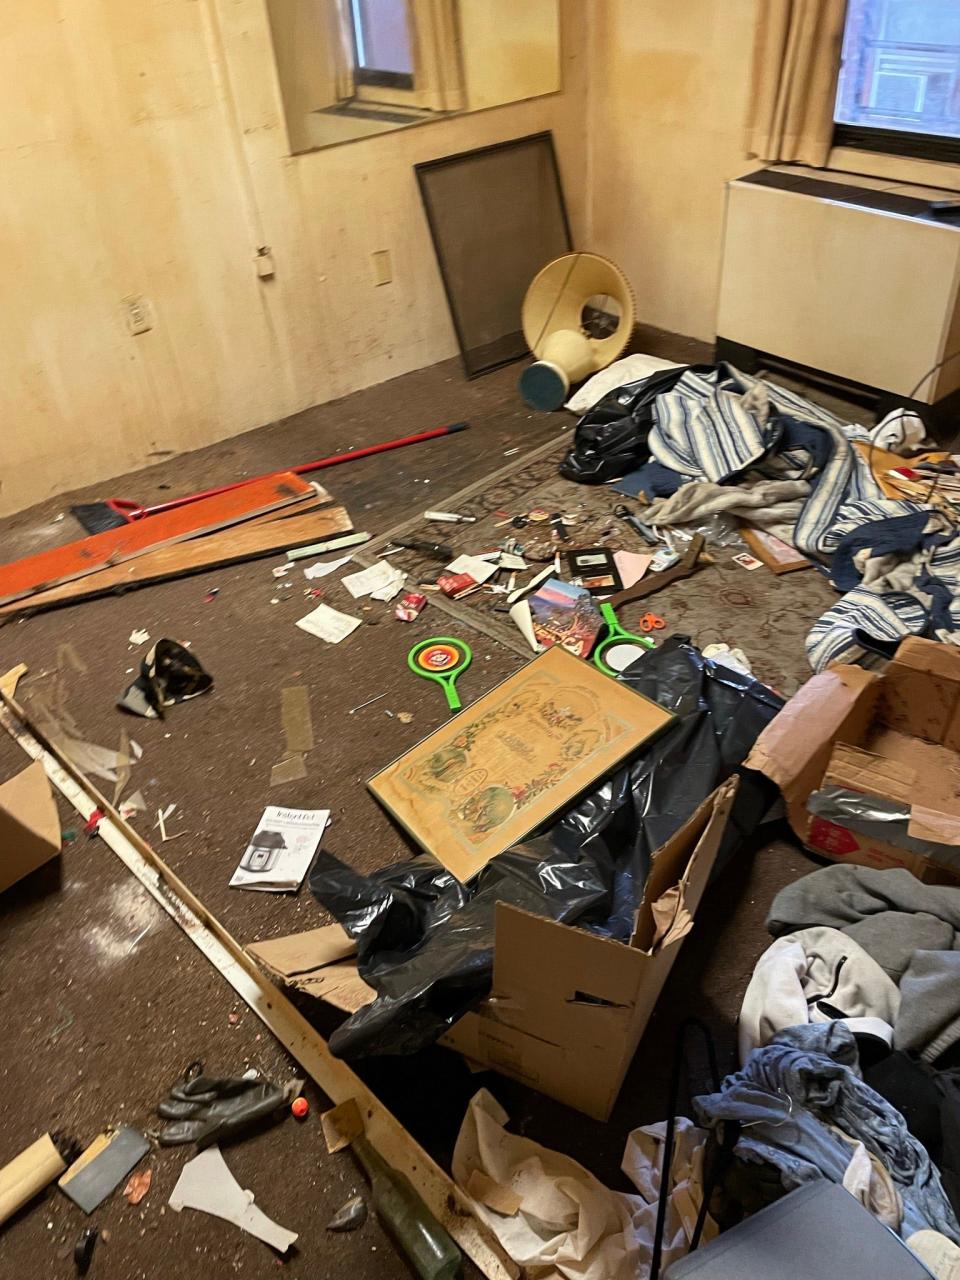 Photos of Room 102 at the Bush House hotel show dirty walls and carpets, though renters were promised weekly maid service. Craig Bennett, who lived in this room until August, said that he paid $900 a month cash and had no lease.